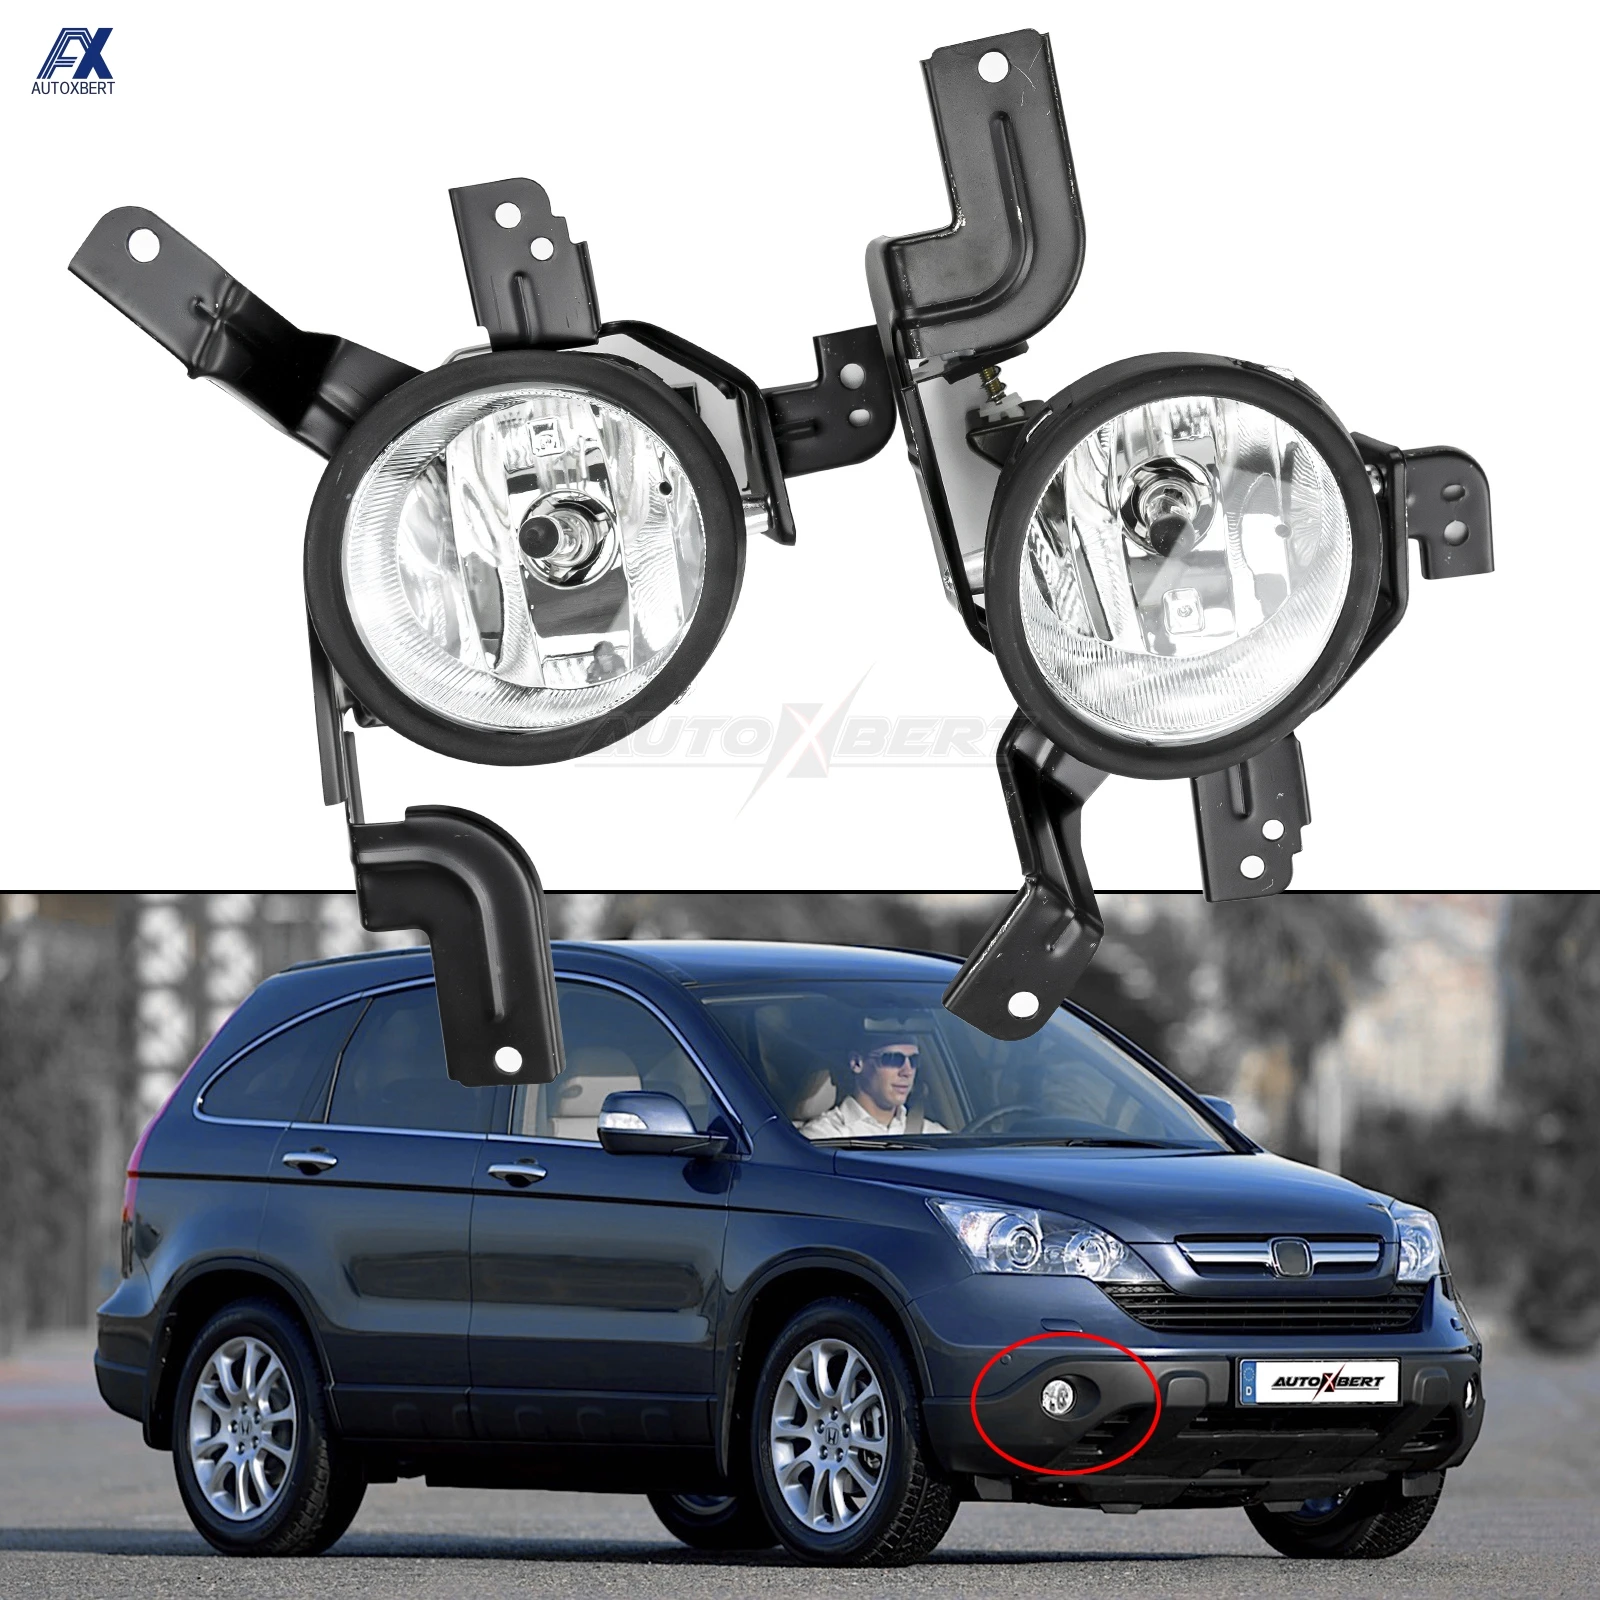 

1 Pair Front Bumper Fog Light Lamp Assembly 55W For Honda CR-V 2007 2008 2009 EX / EX-L/ LX Clear Lens with Bulbs Wiring Harness